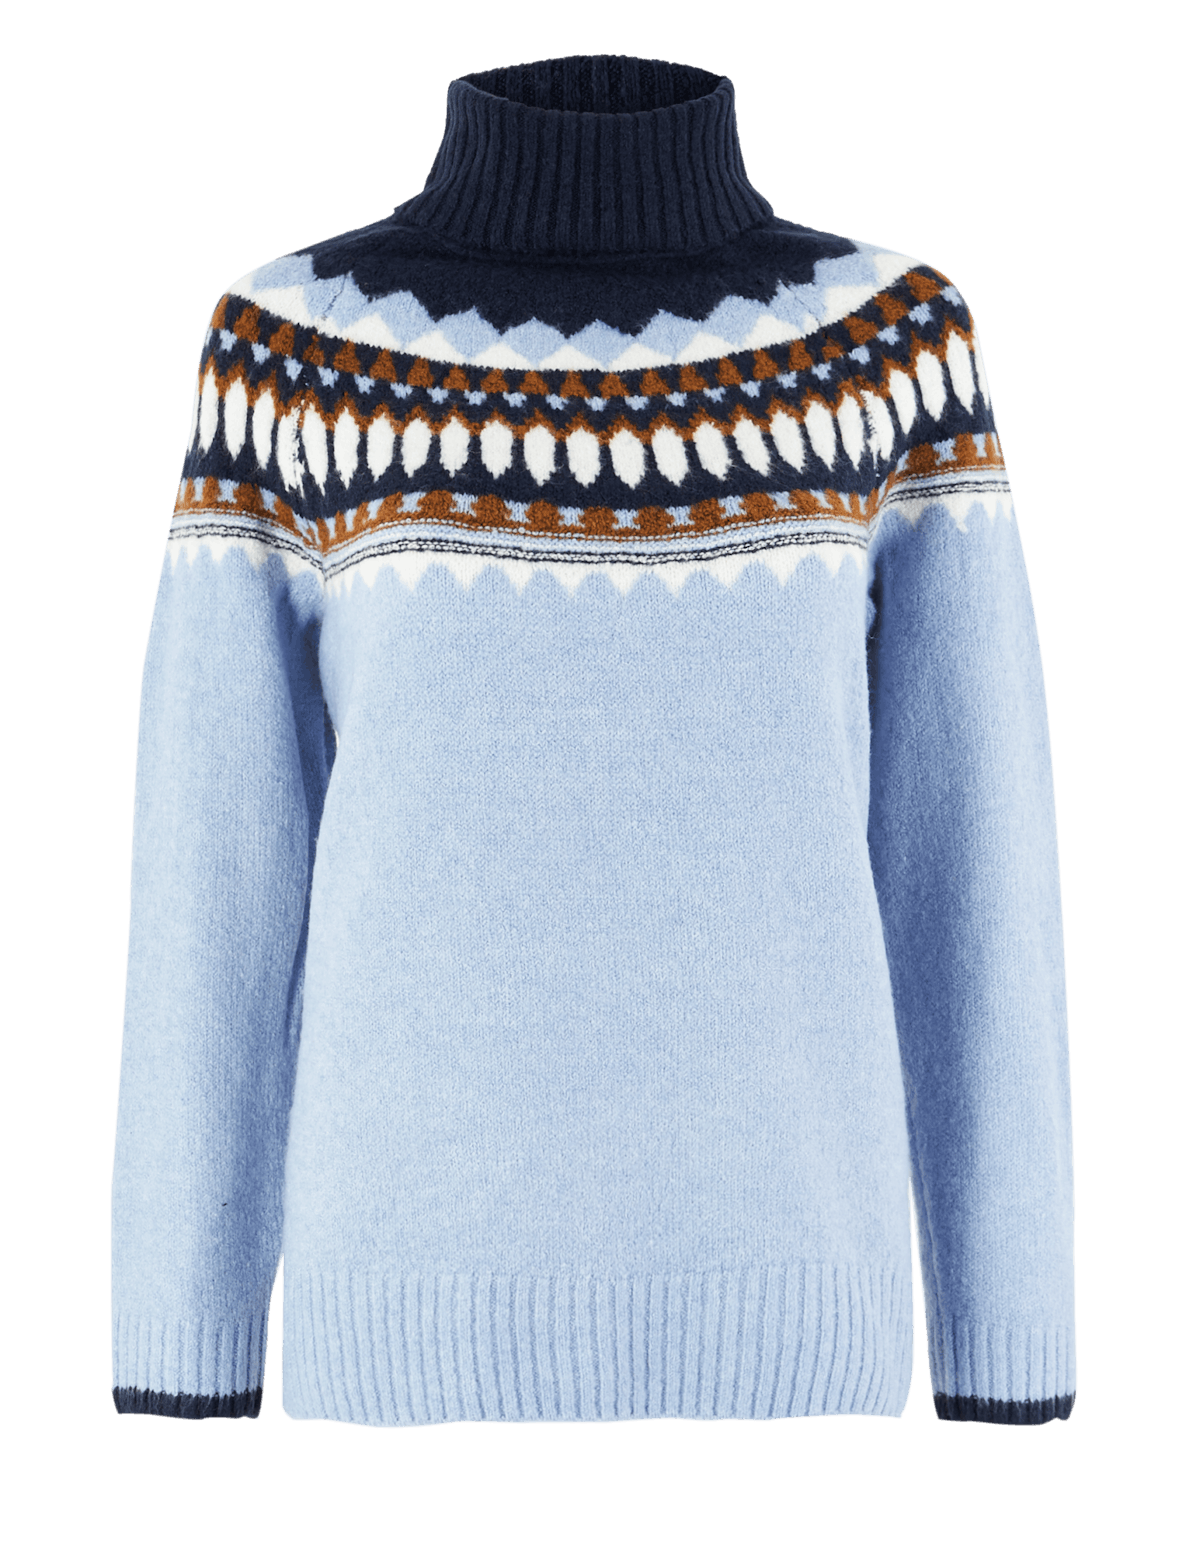 The best Christmas jumpers to buy now